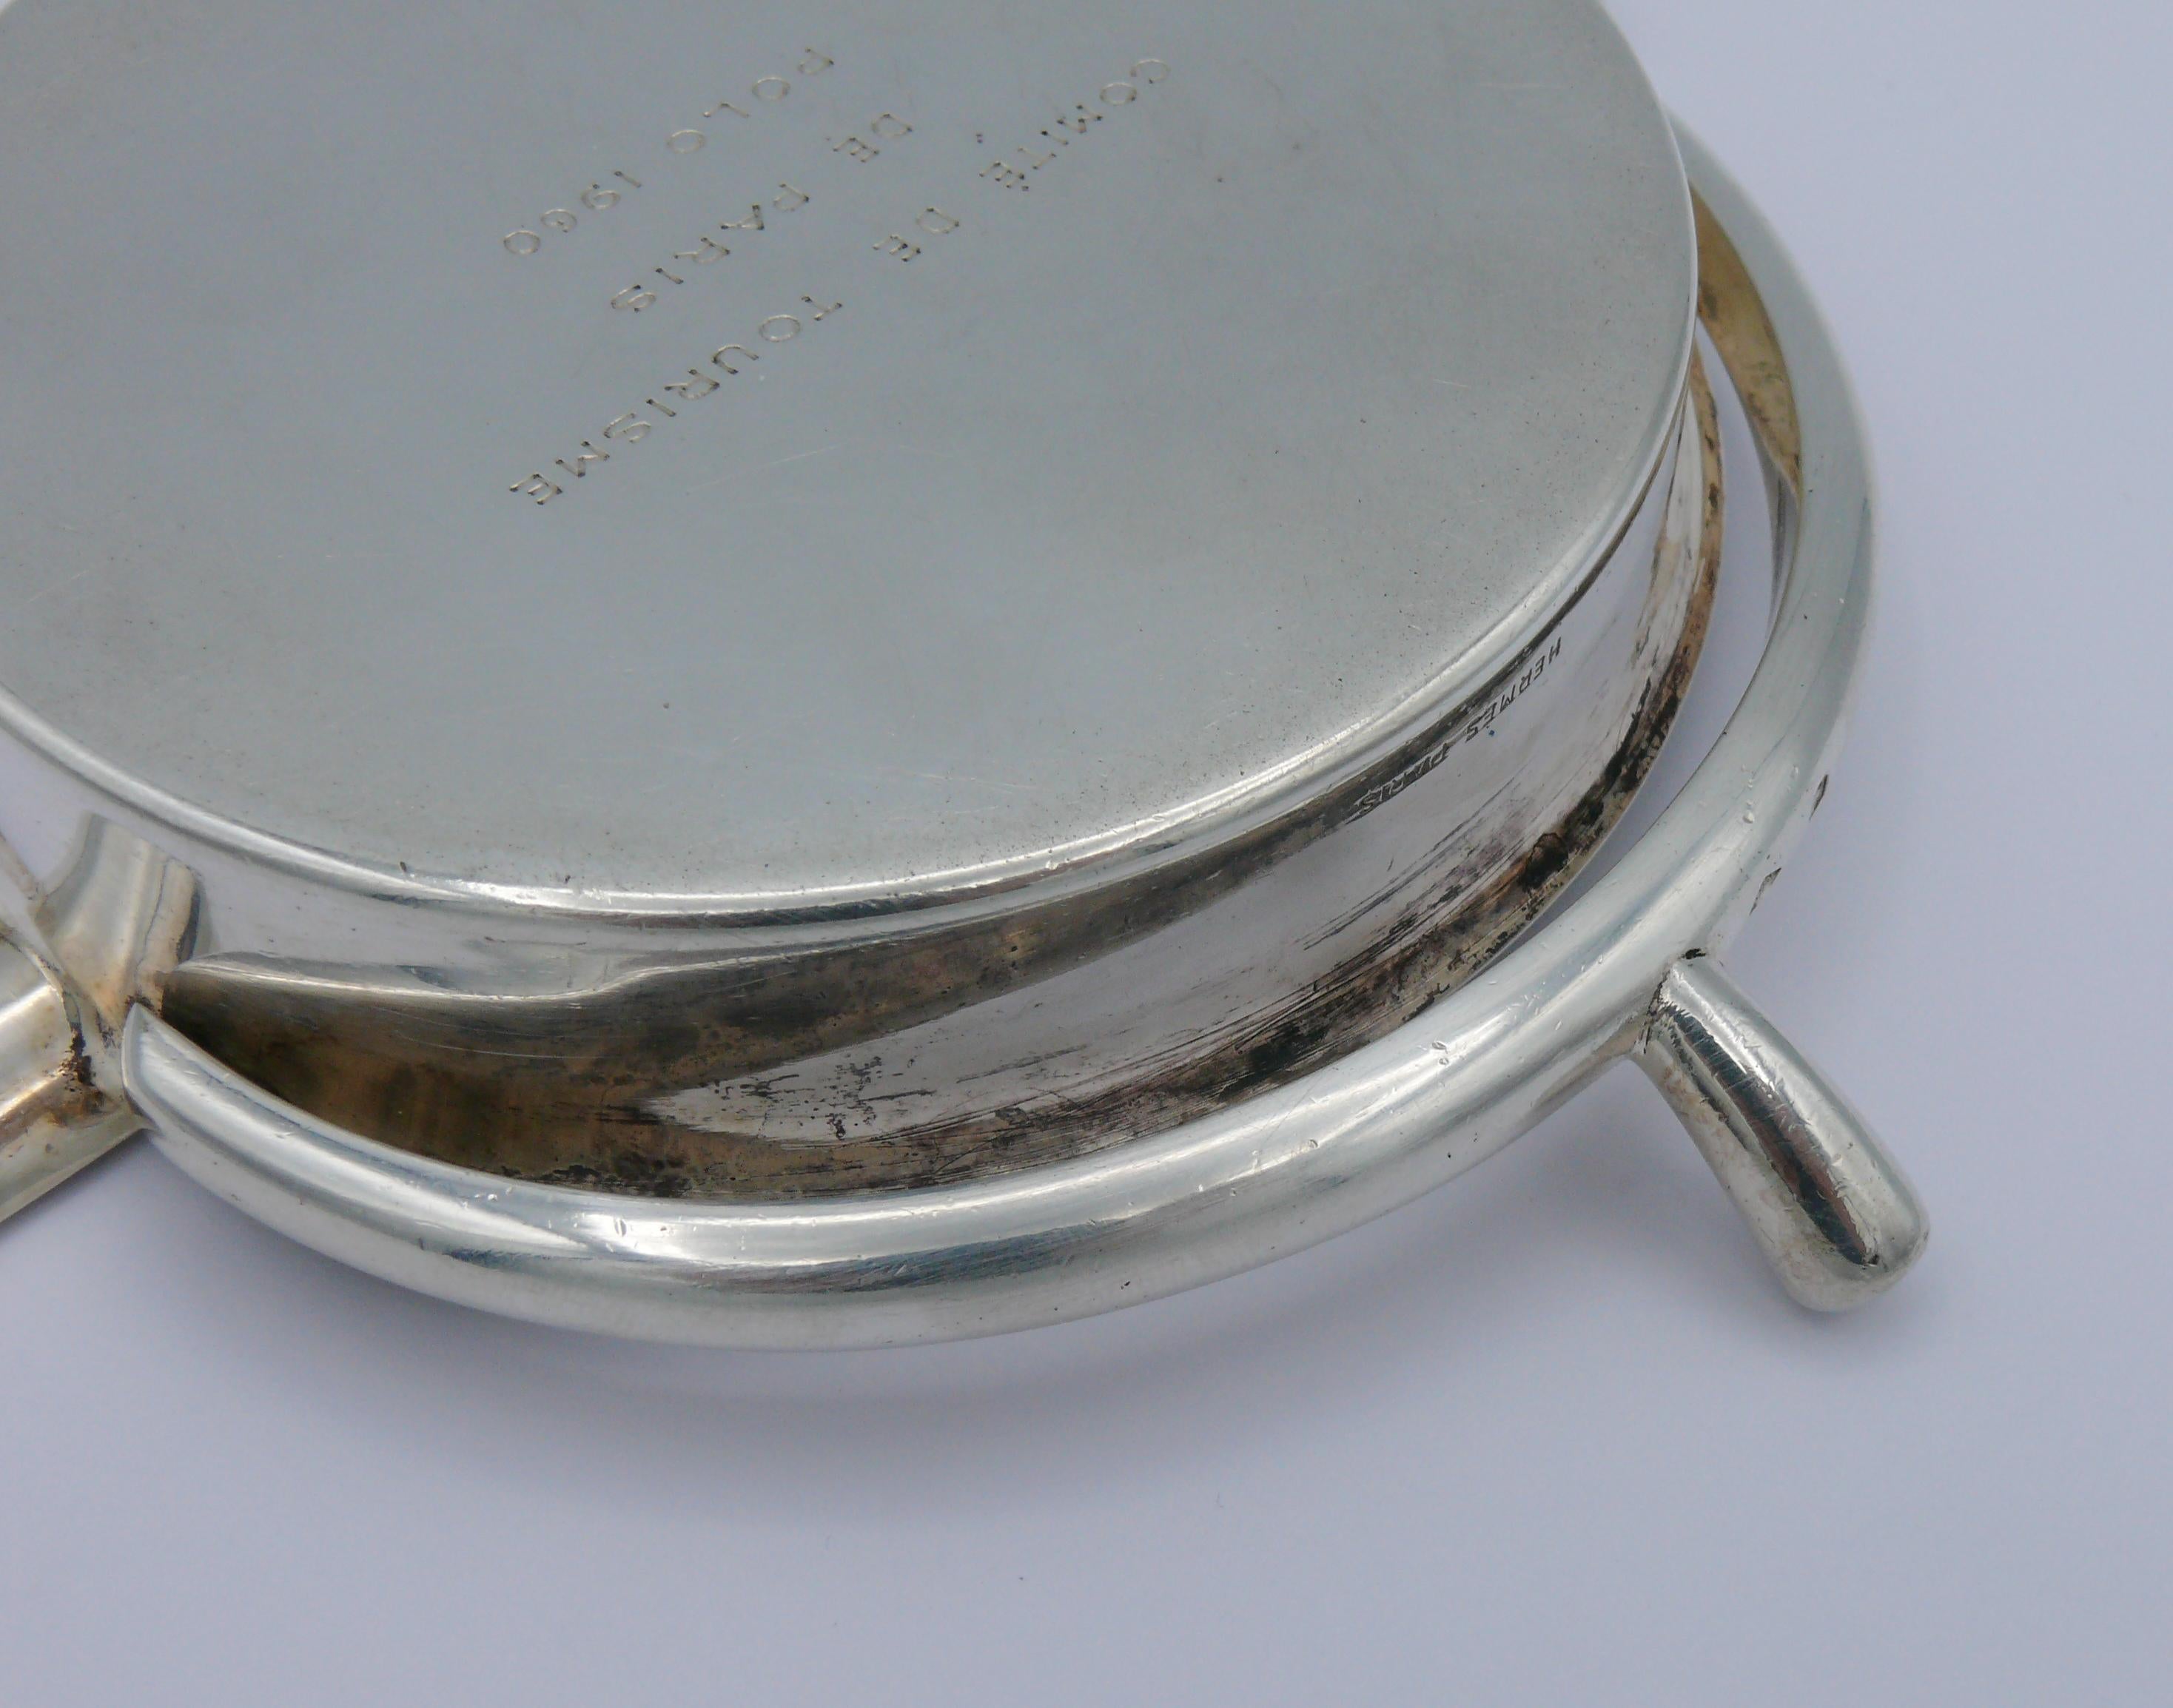 HERMES Vintage Solid Silver Guilloche Stirrup Ashtray For Sale 8